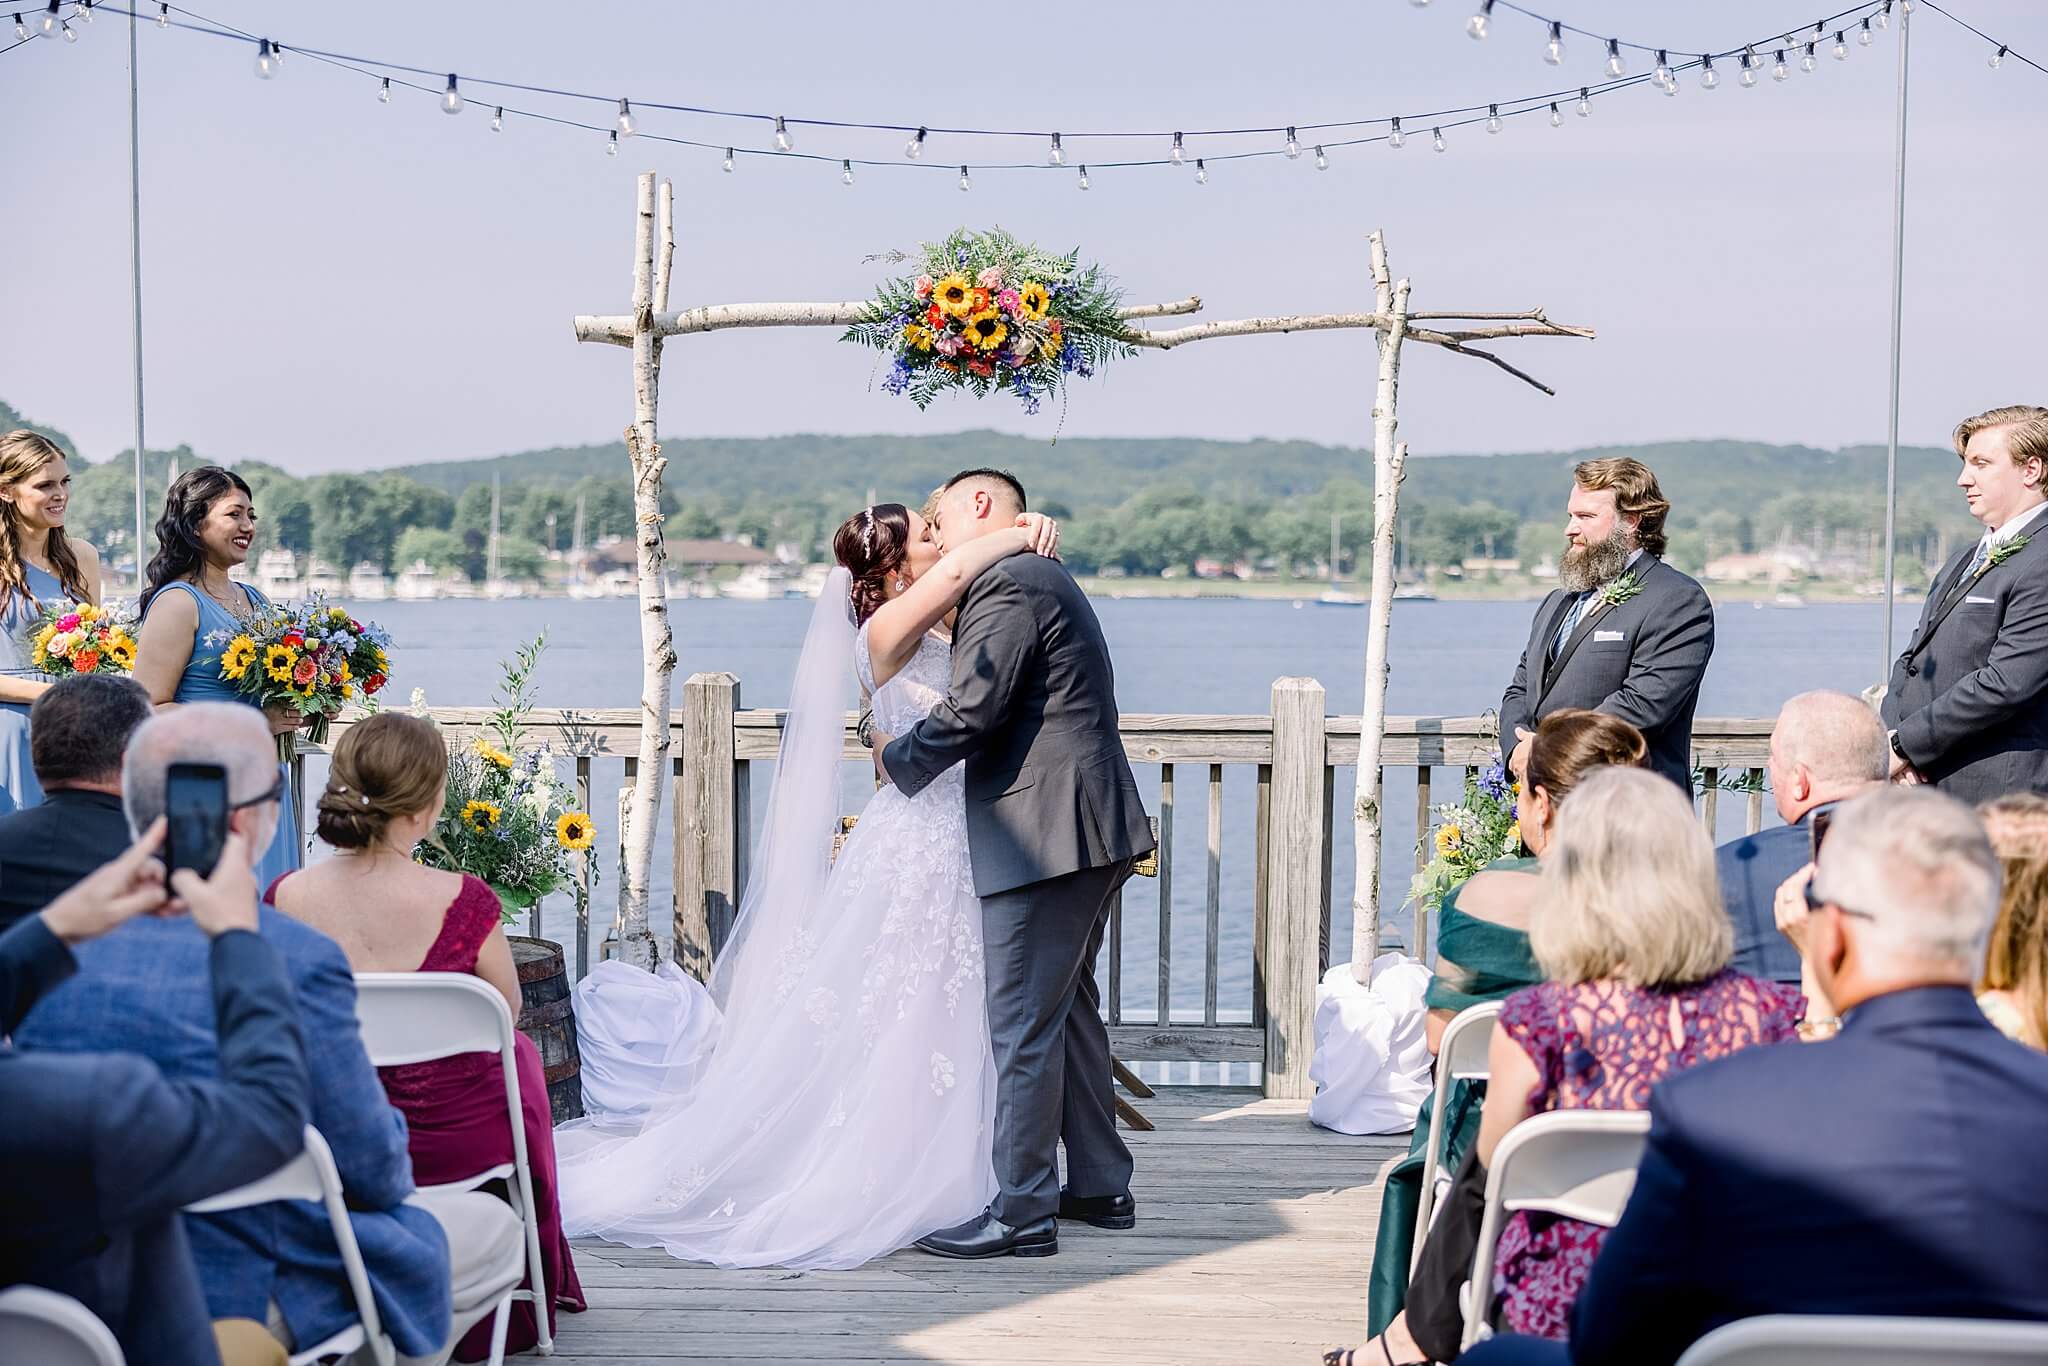 Bride and groom share first kiss during Elberta Life Saving Station wedding day.